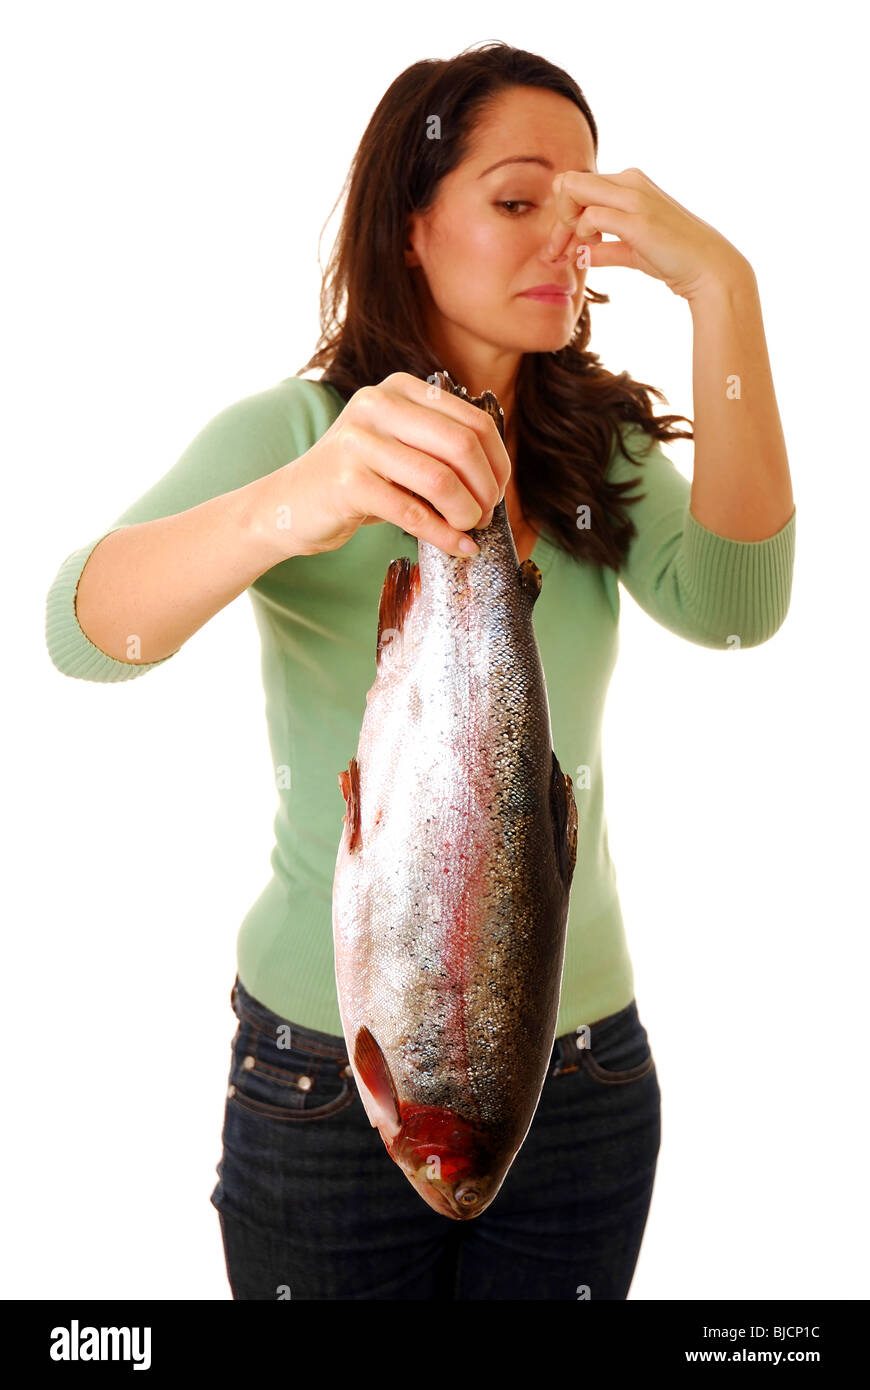 Woman holding a smelly fish Stock Photo